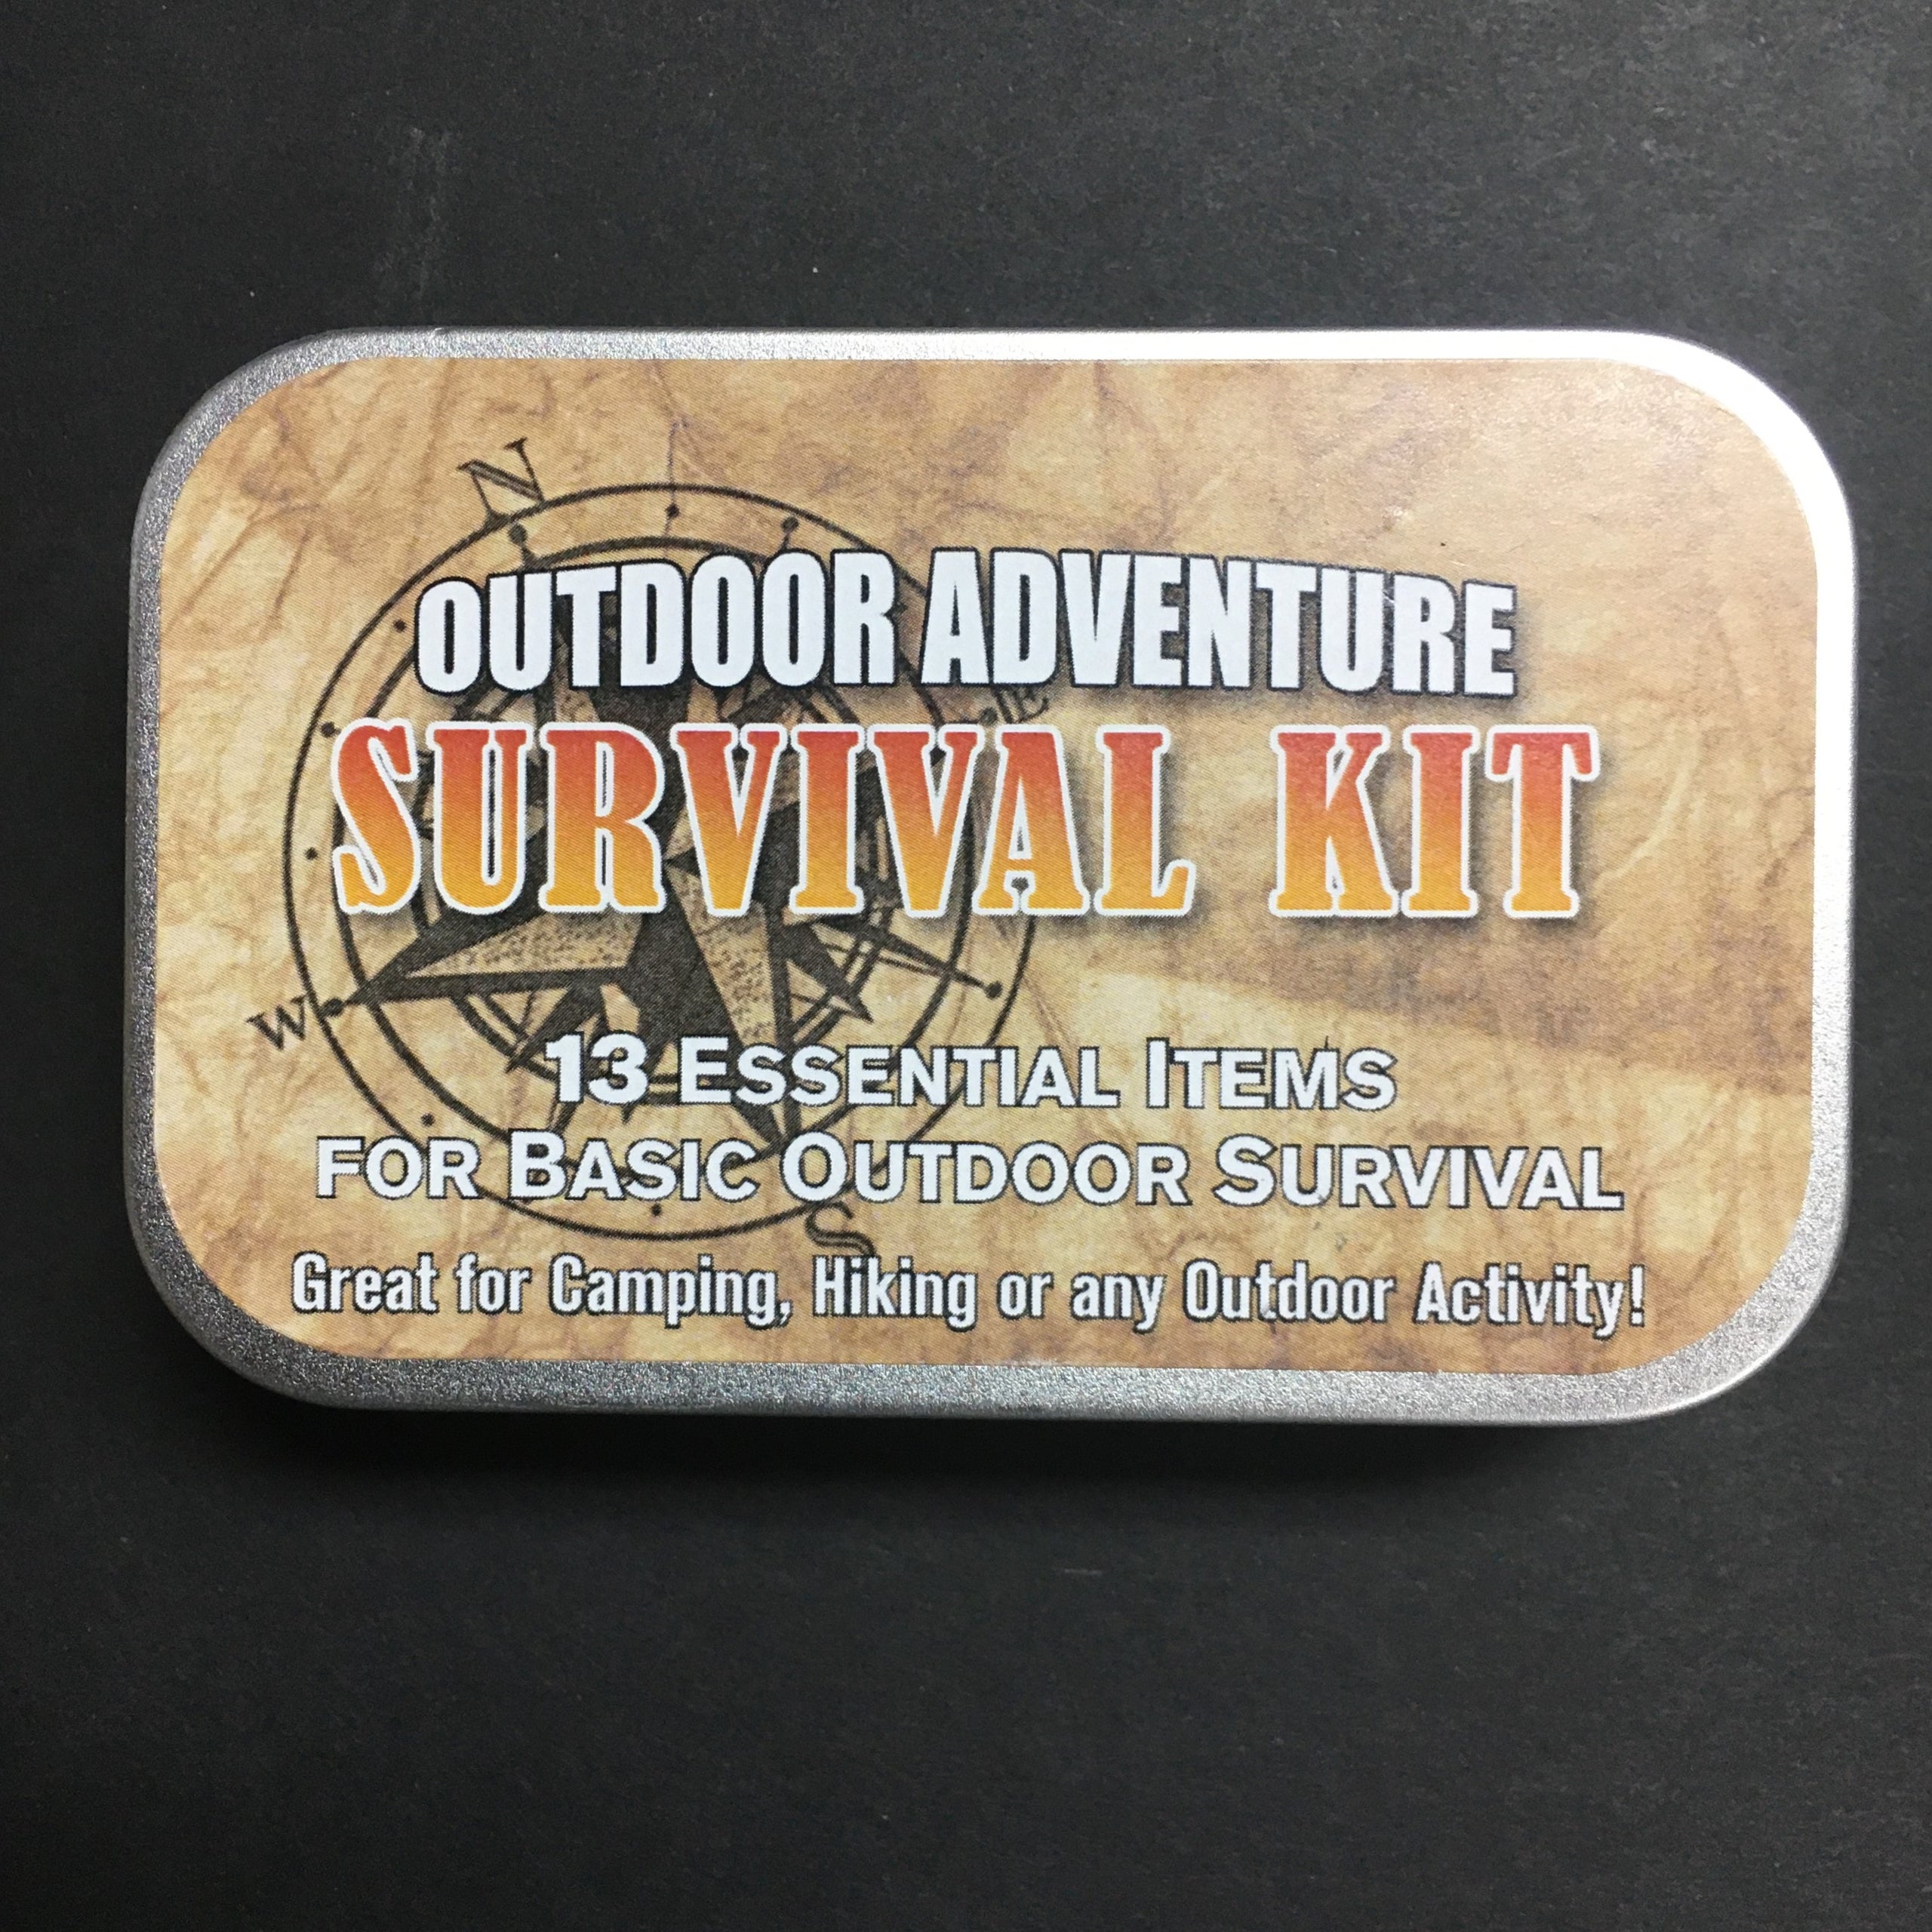 What Should be Included in Your Outdoor Survival Kit?